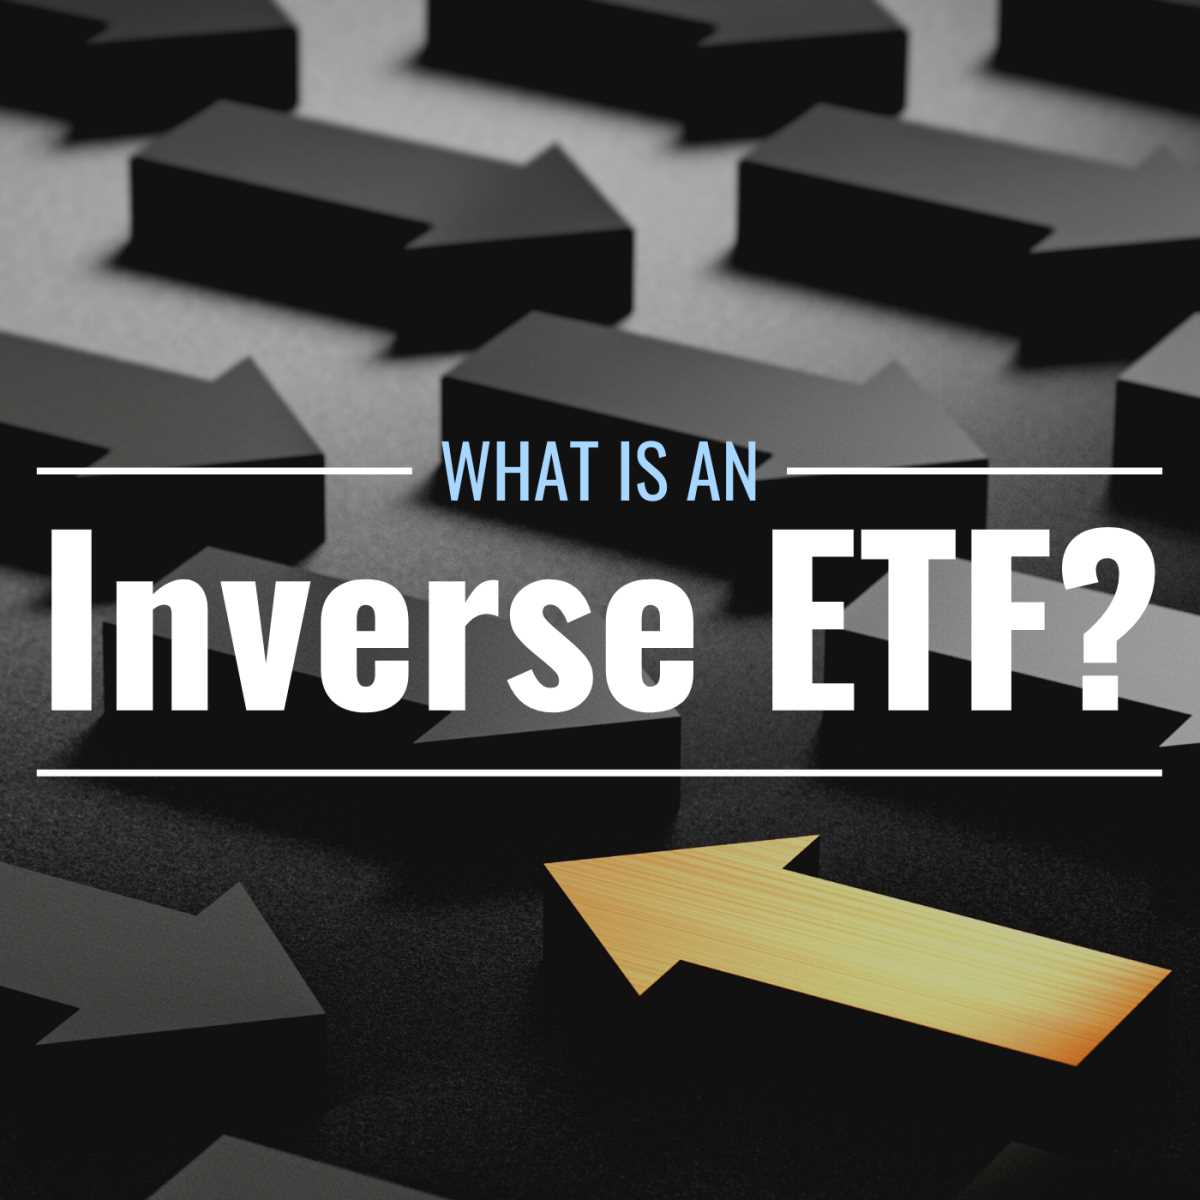 Comparison of Inverse ETFs to Short Selling